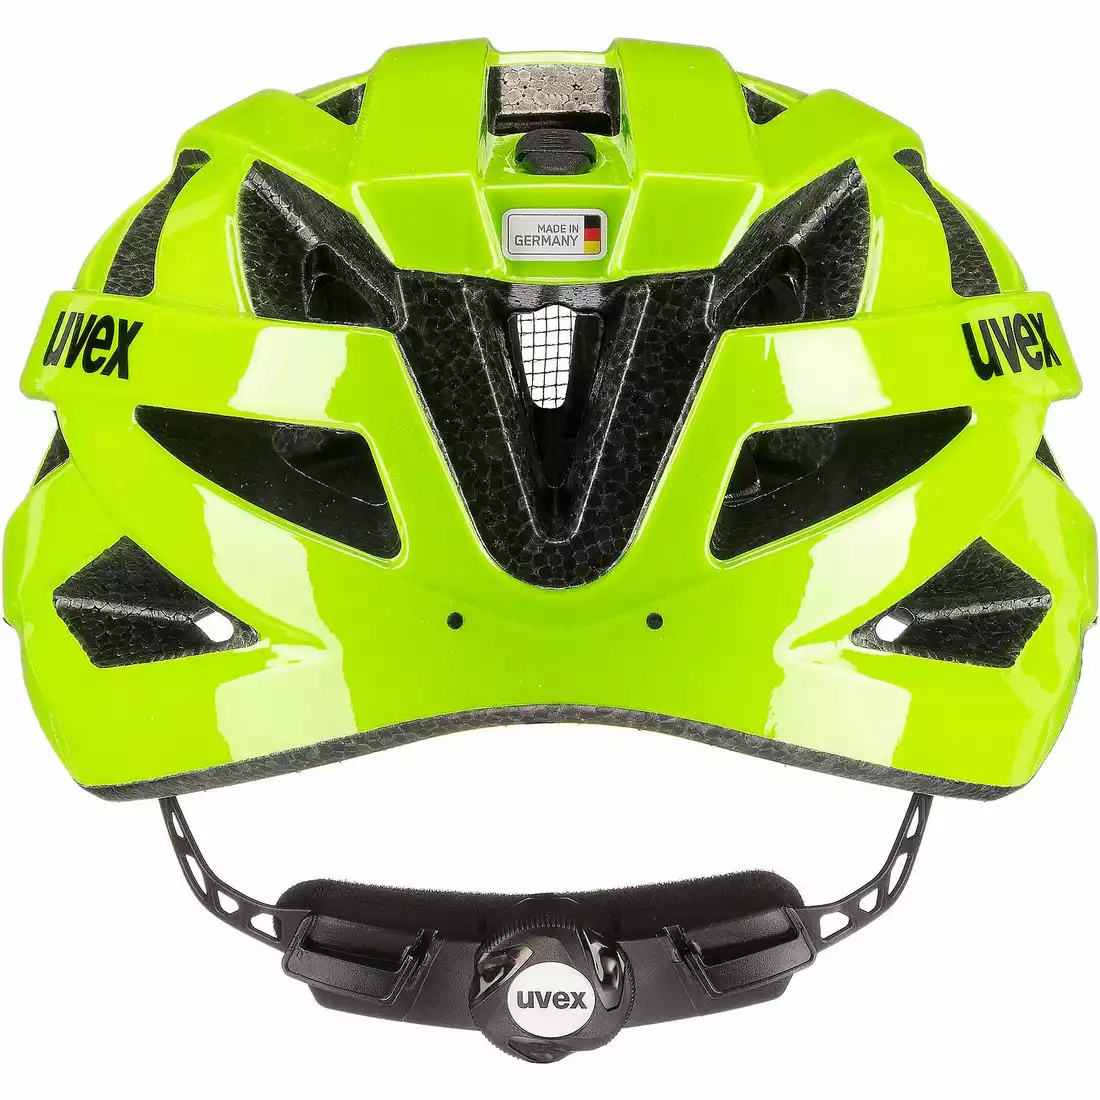 UVEX kask rowerowy I-VO 3D NEON yellow 